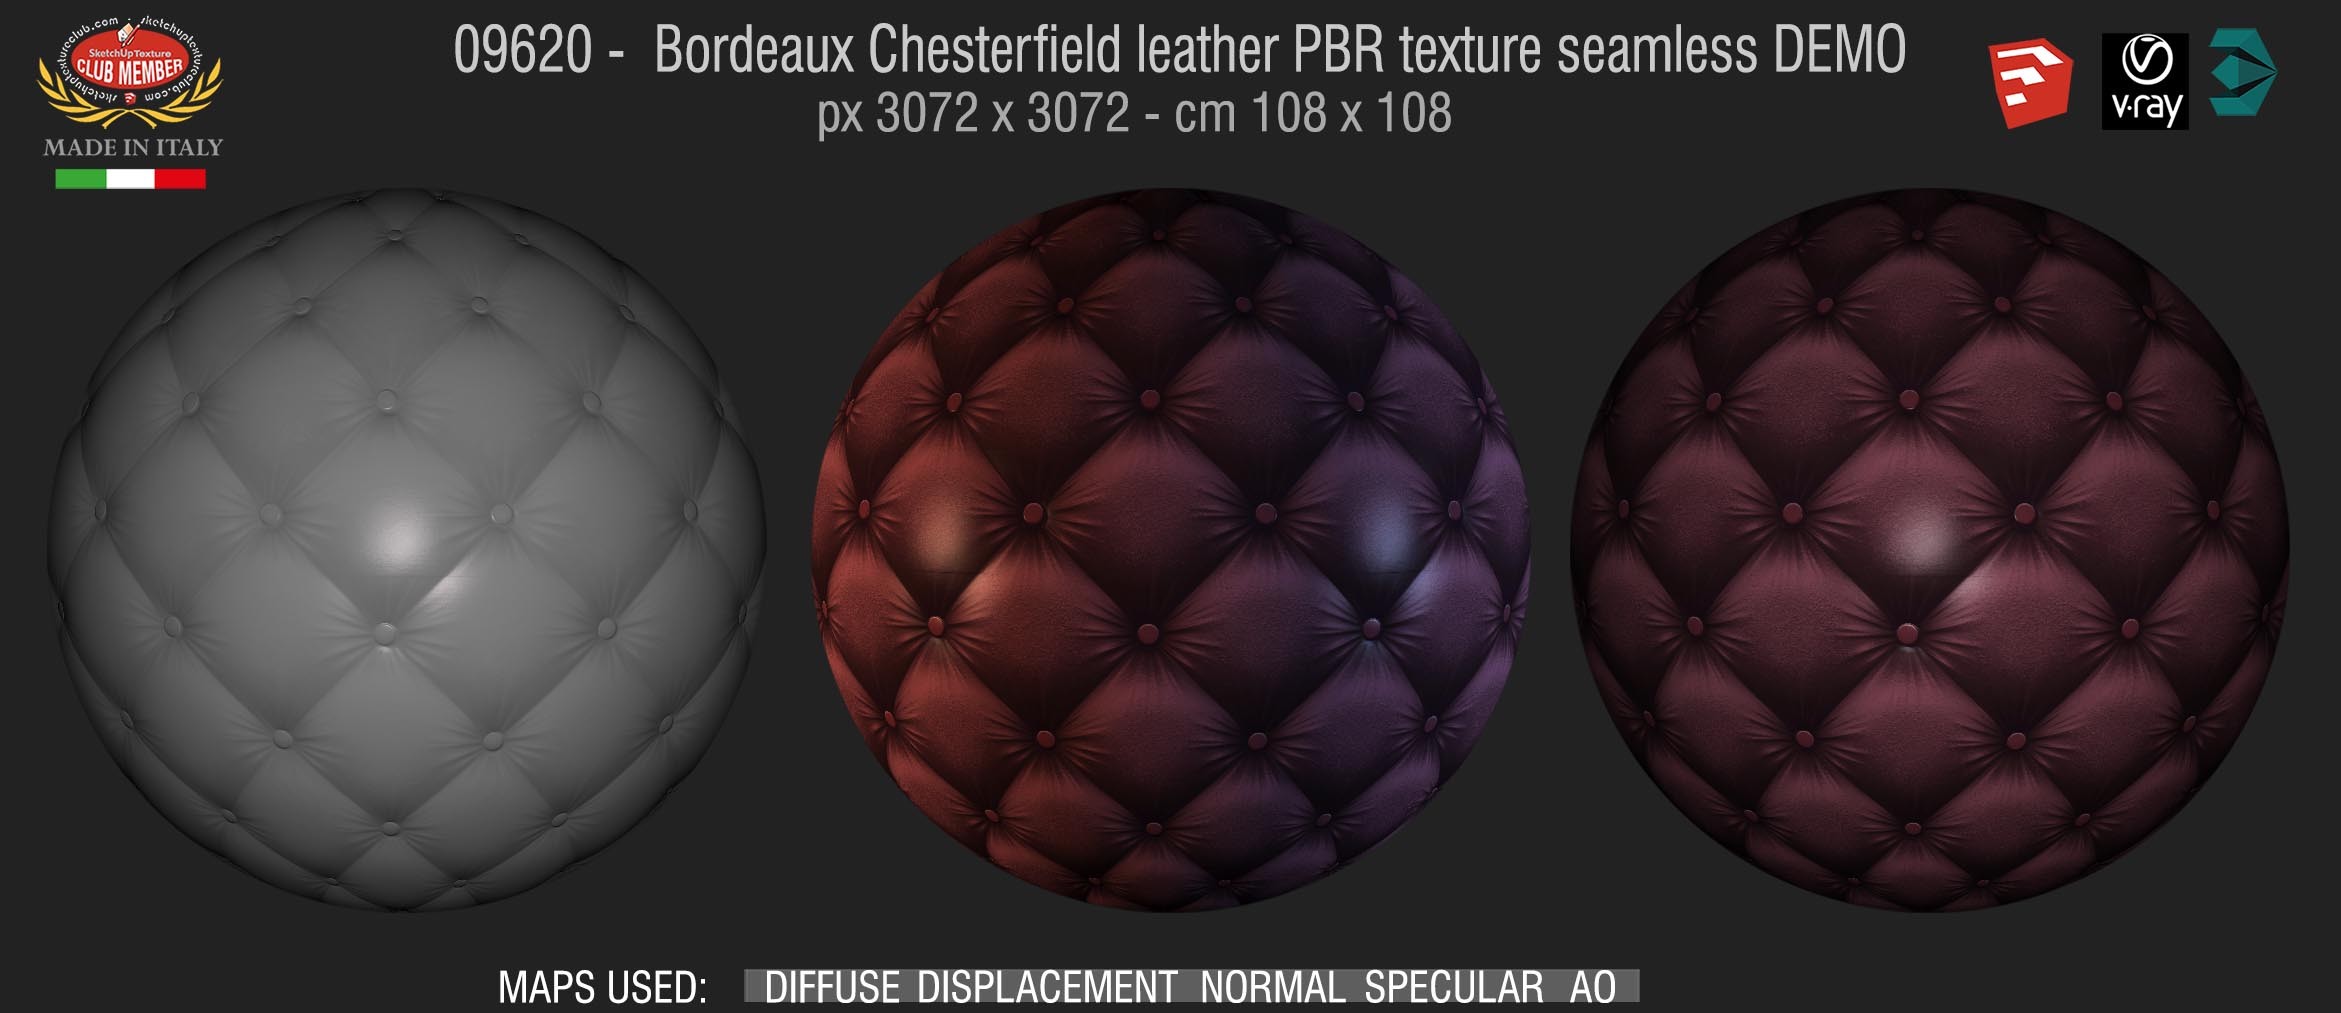 09620 Bordeaux Chesterfield leather PBR texture seamless DEMO